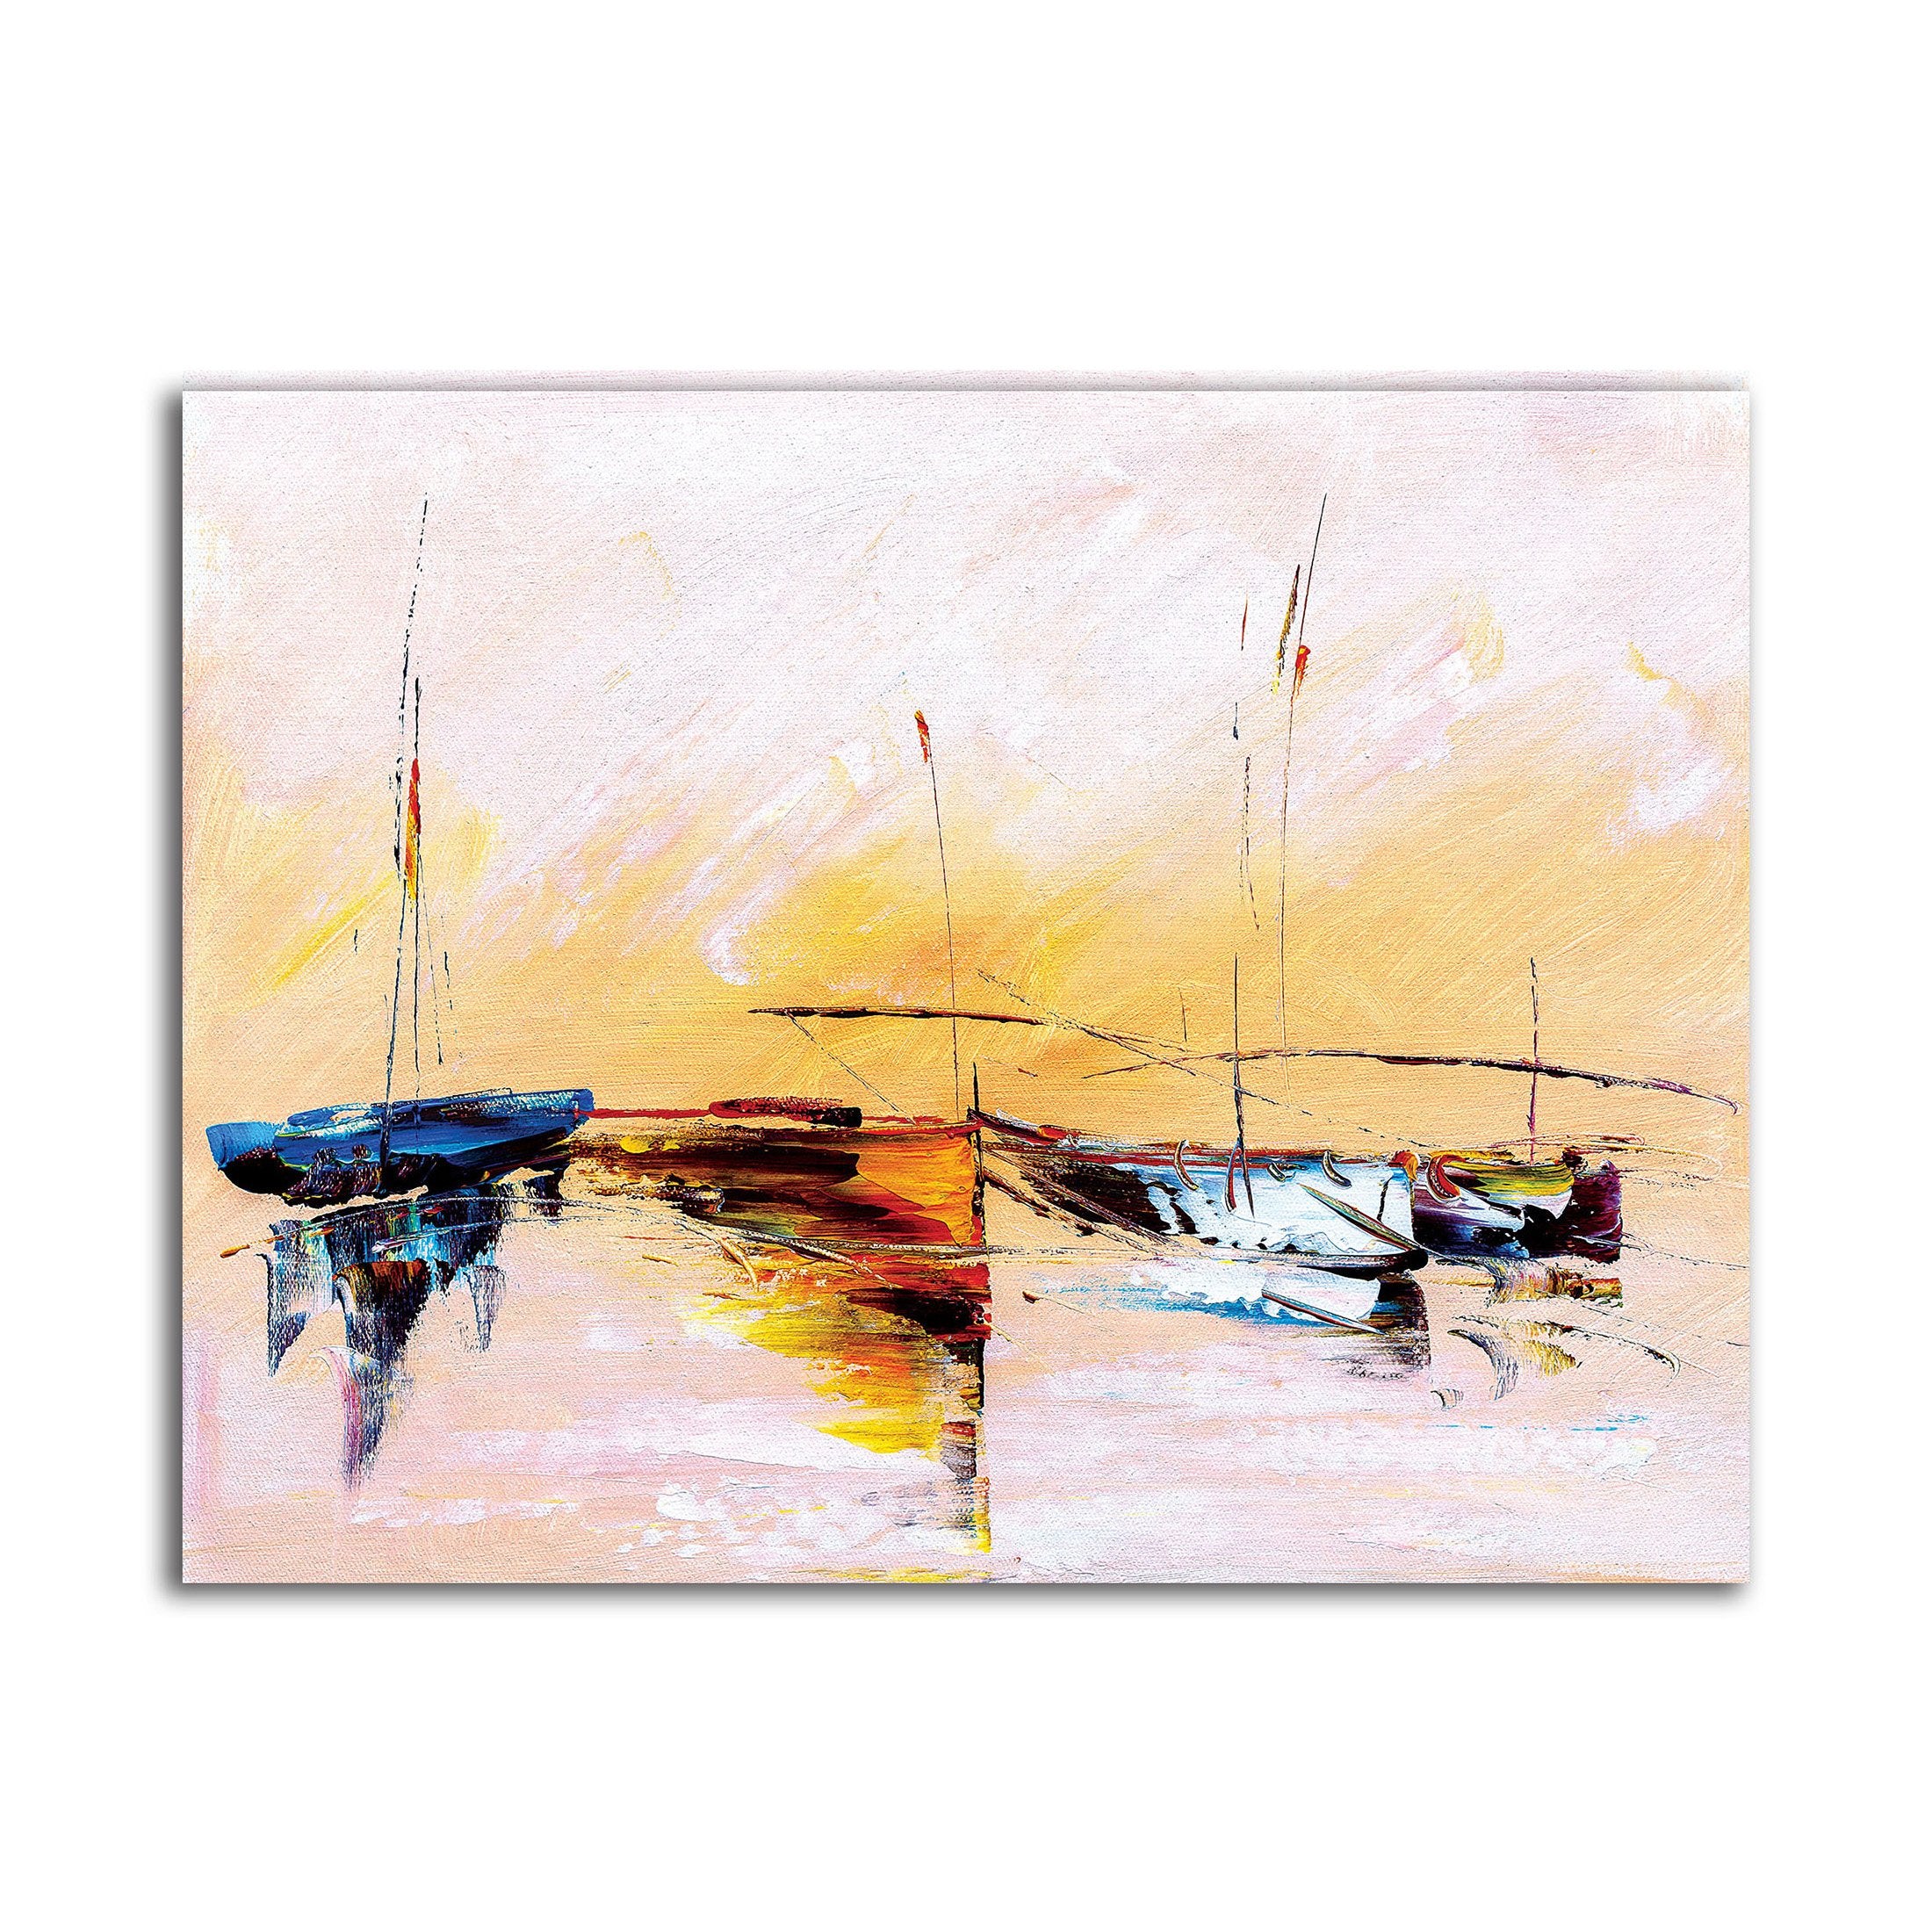 Boats In the River